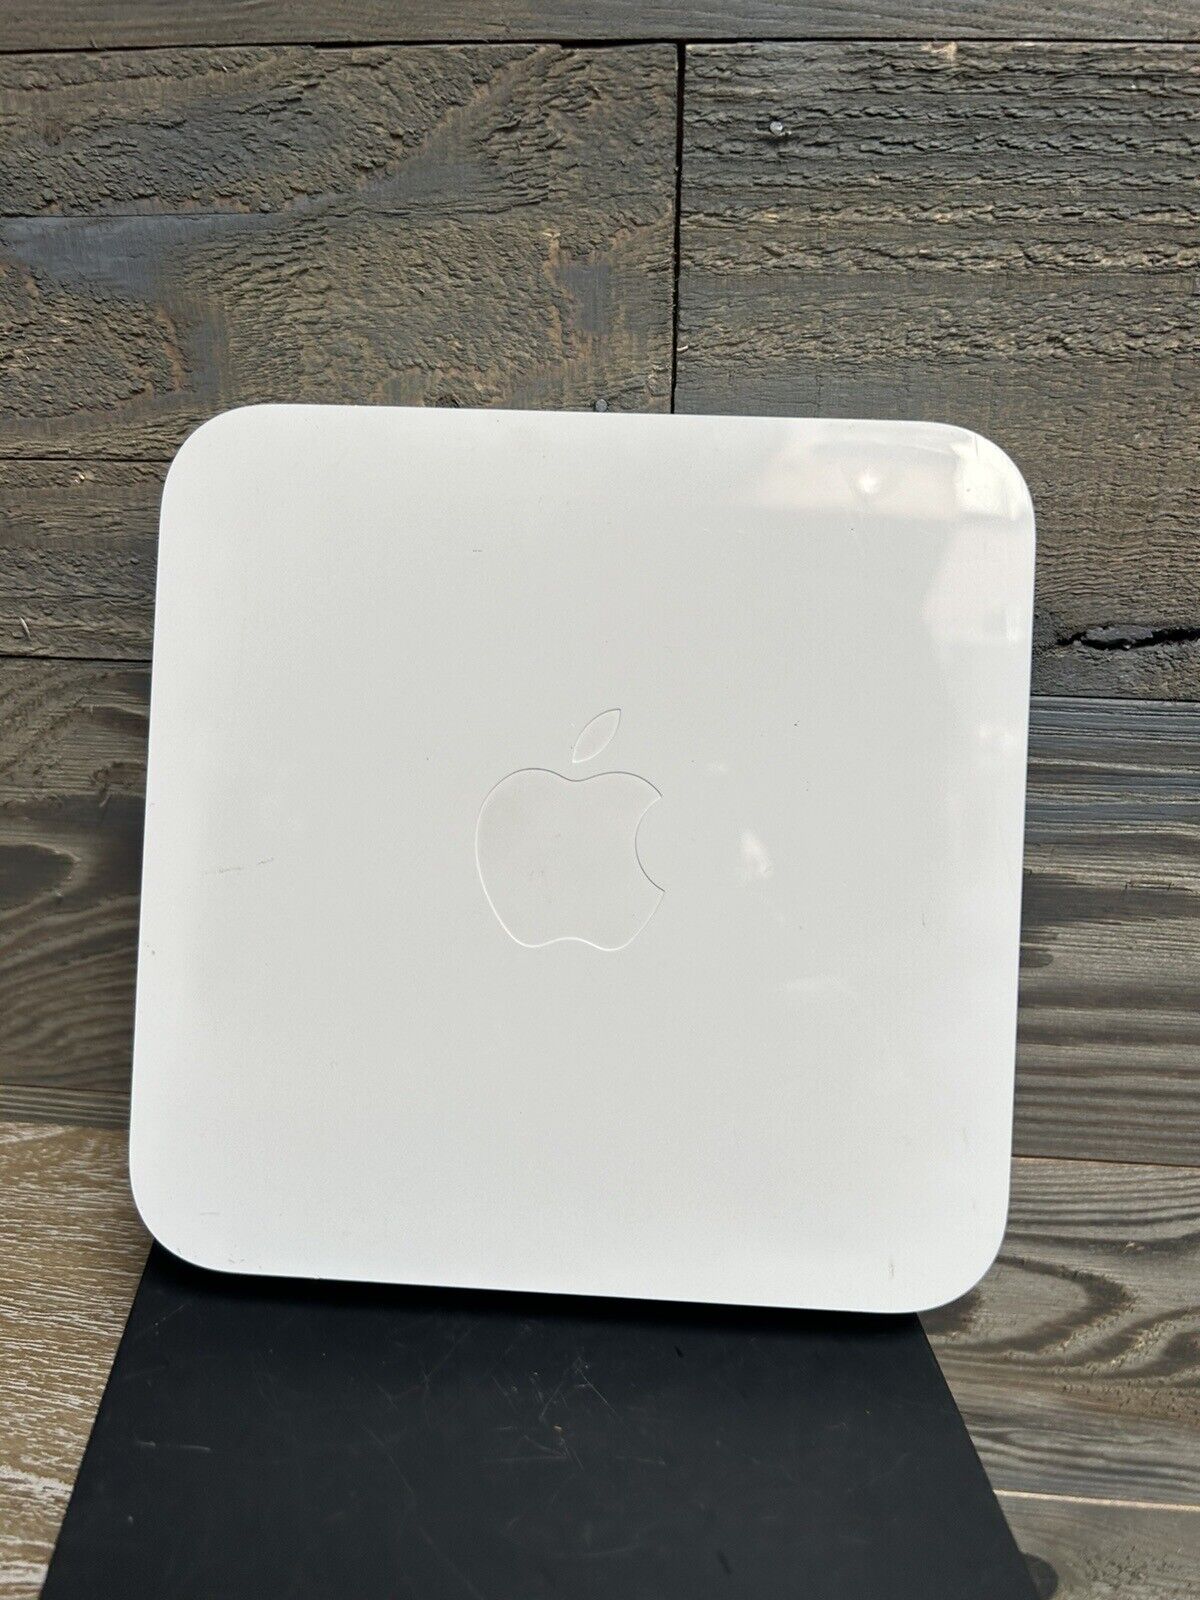 Apple AirPort Extreme Base Station 5th Gen NO POWER SUPPLY (A1408) White